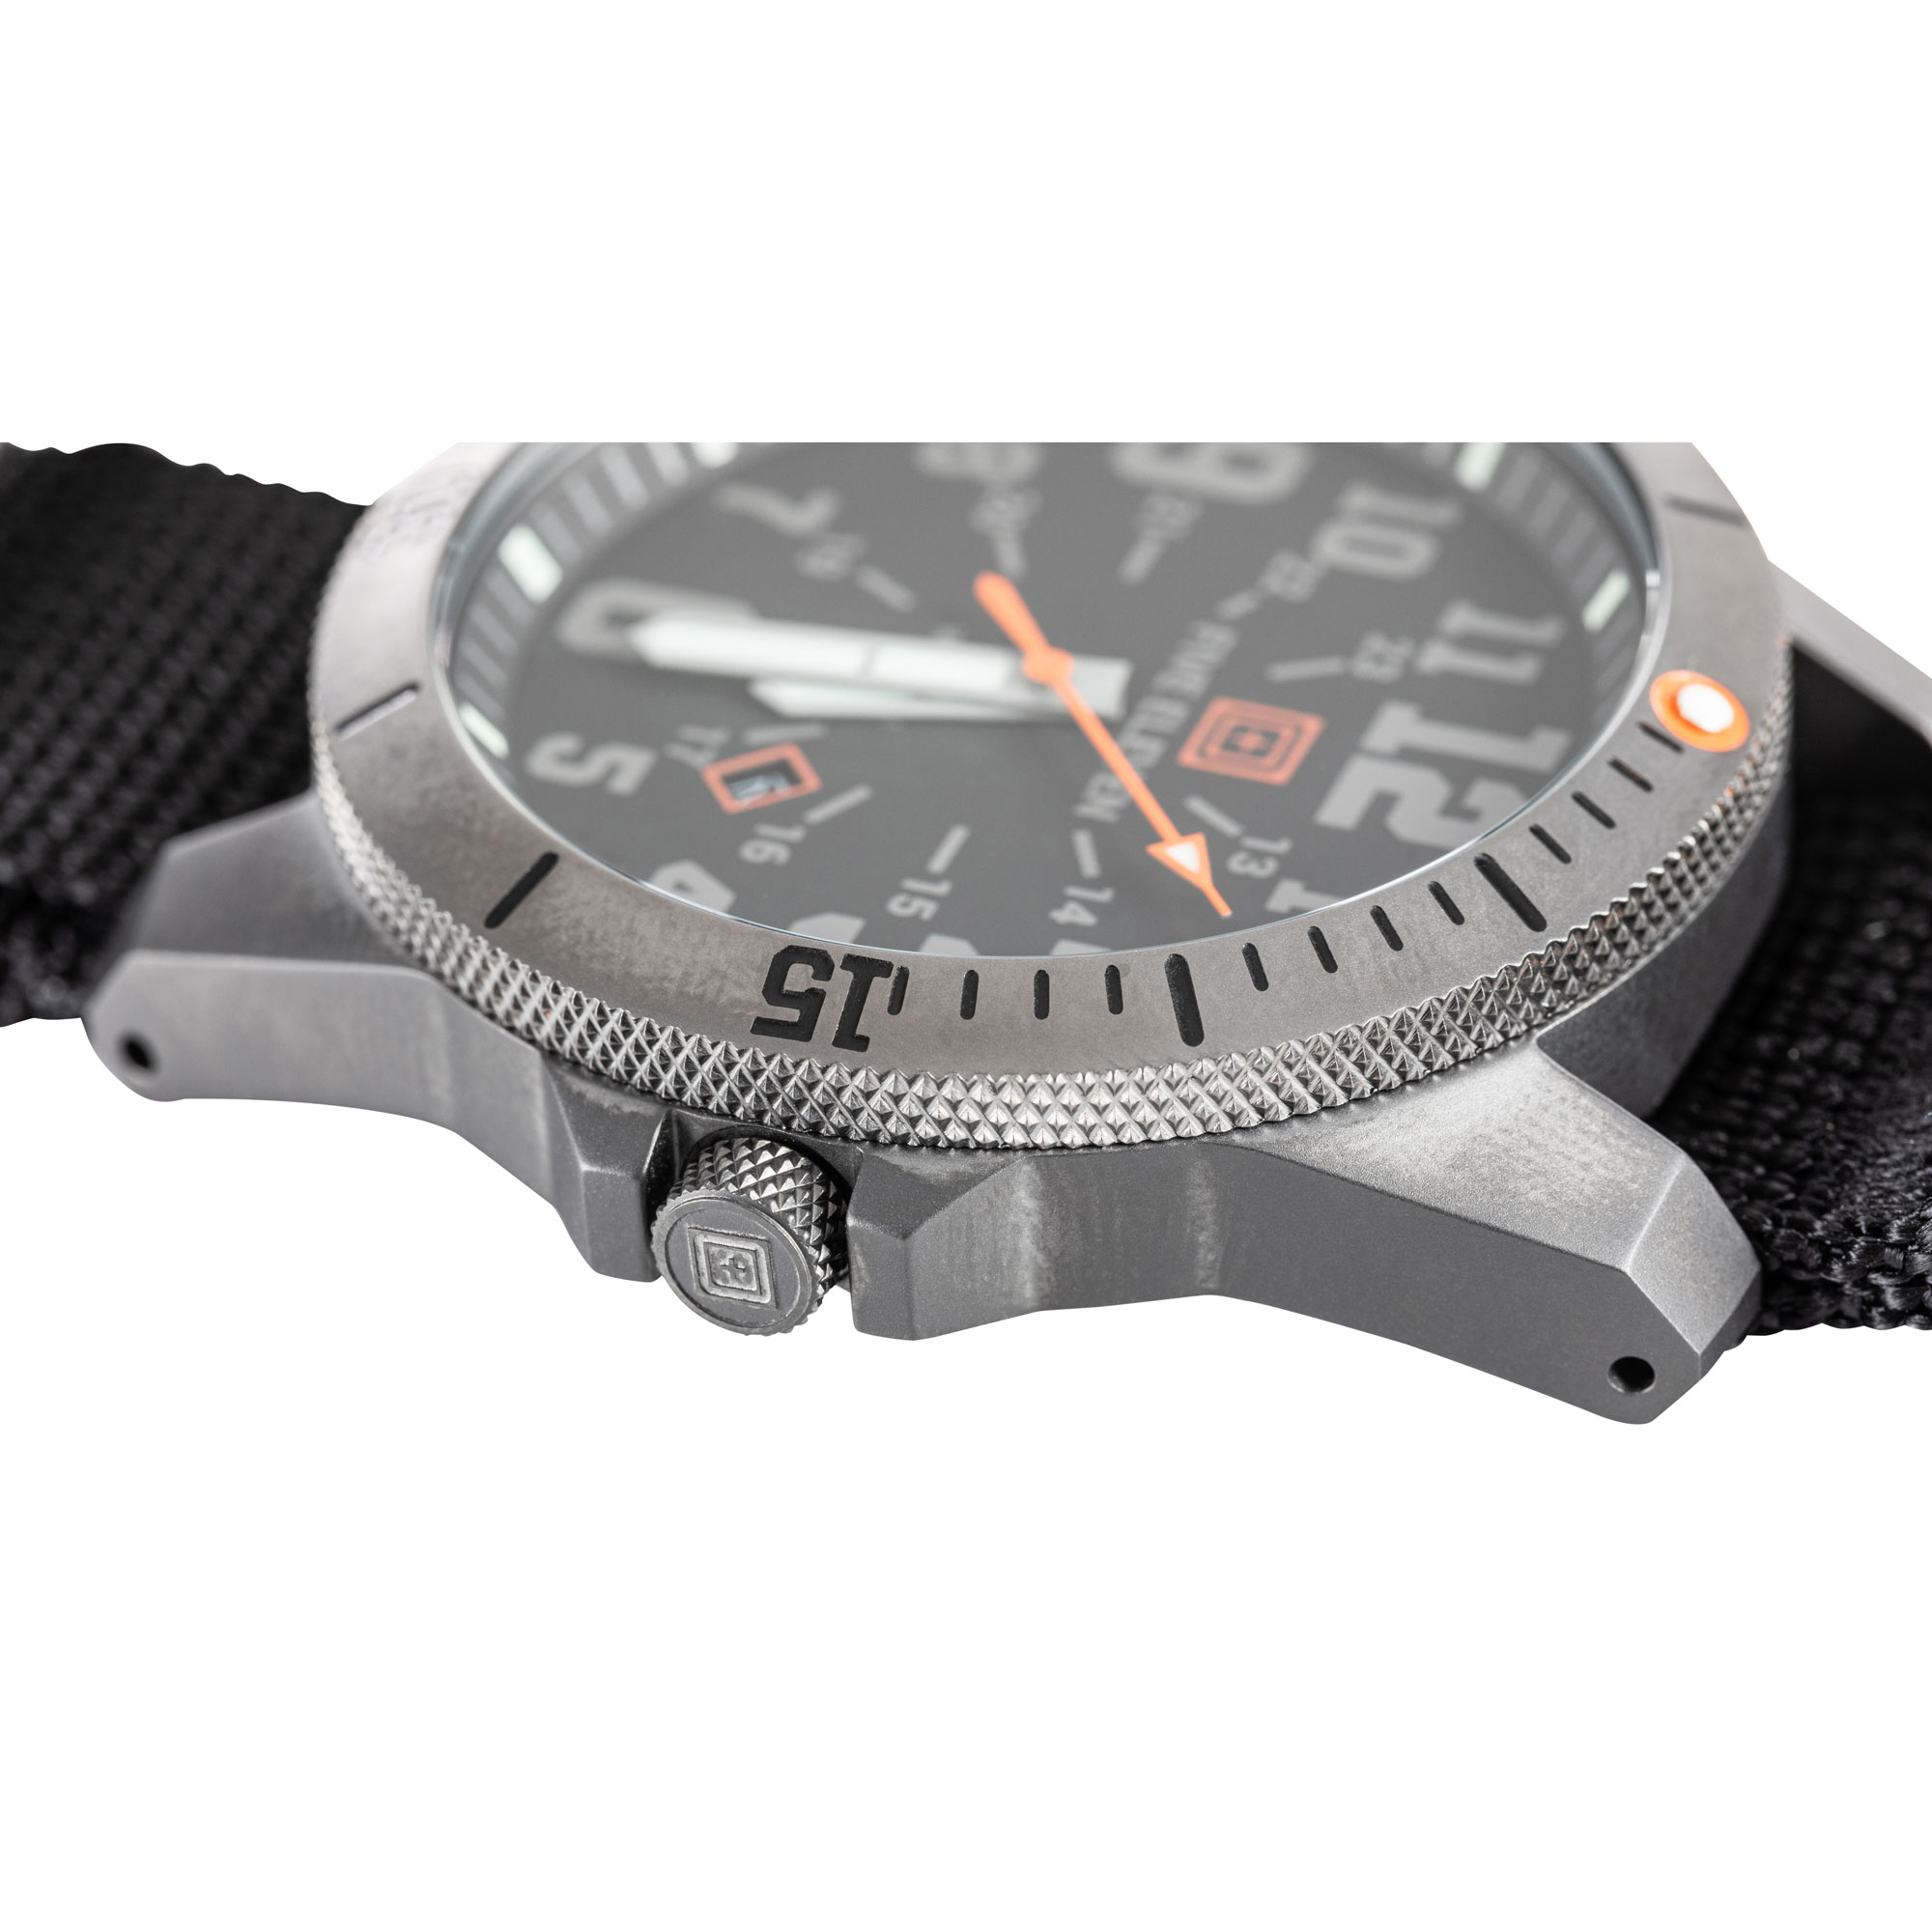 Buy 5 11 Tactical Field Watch 2 0 Black 56625 019 Price 189 08 Usd Worldwide Shipping